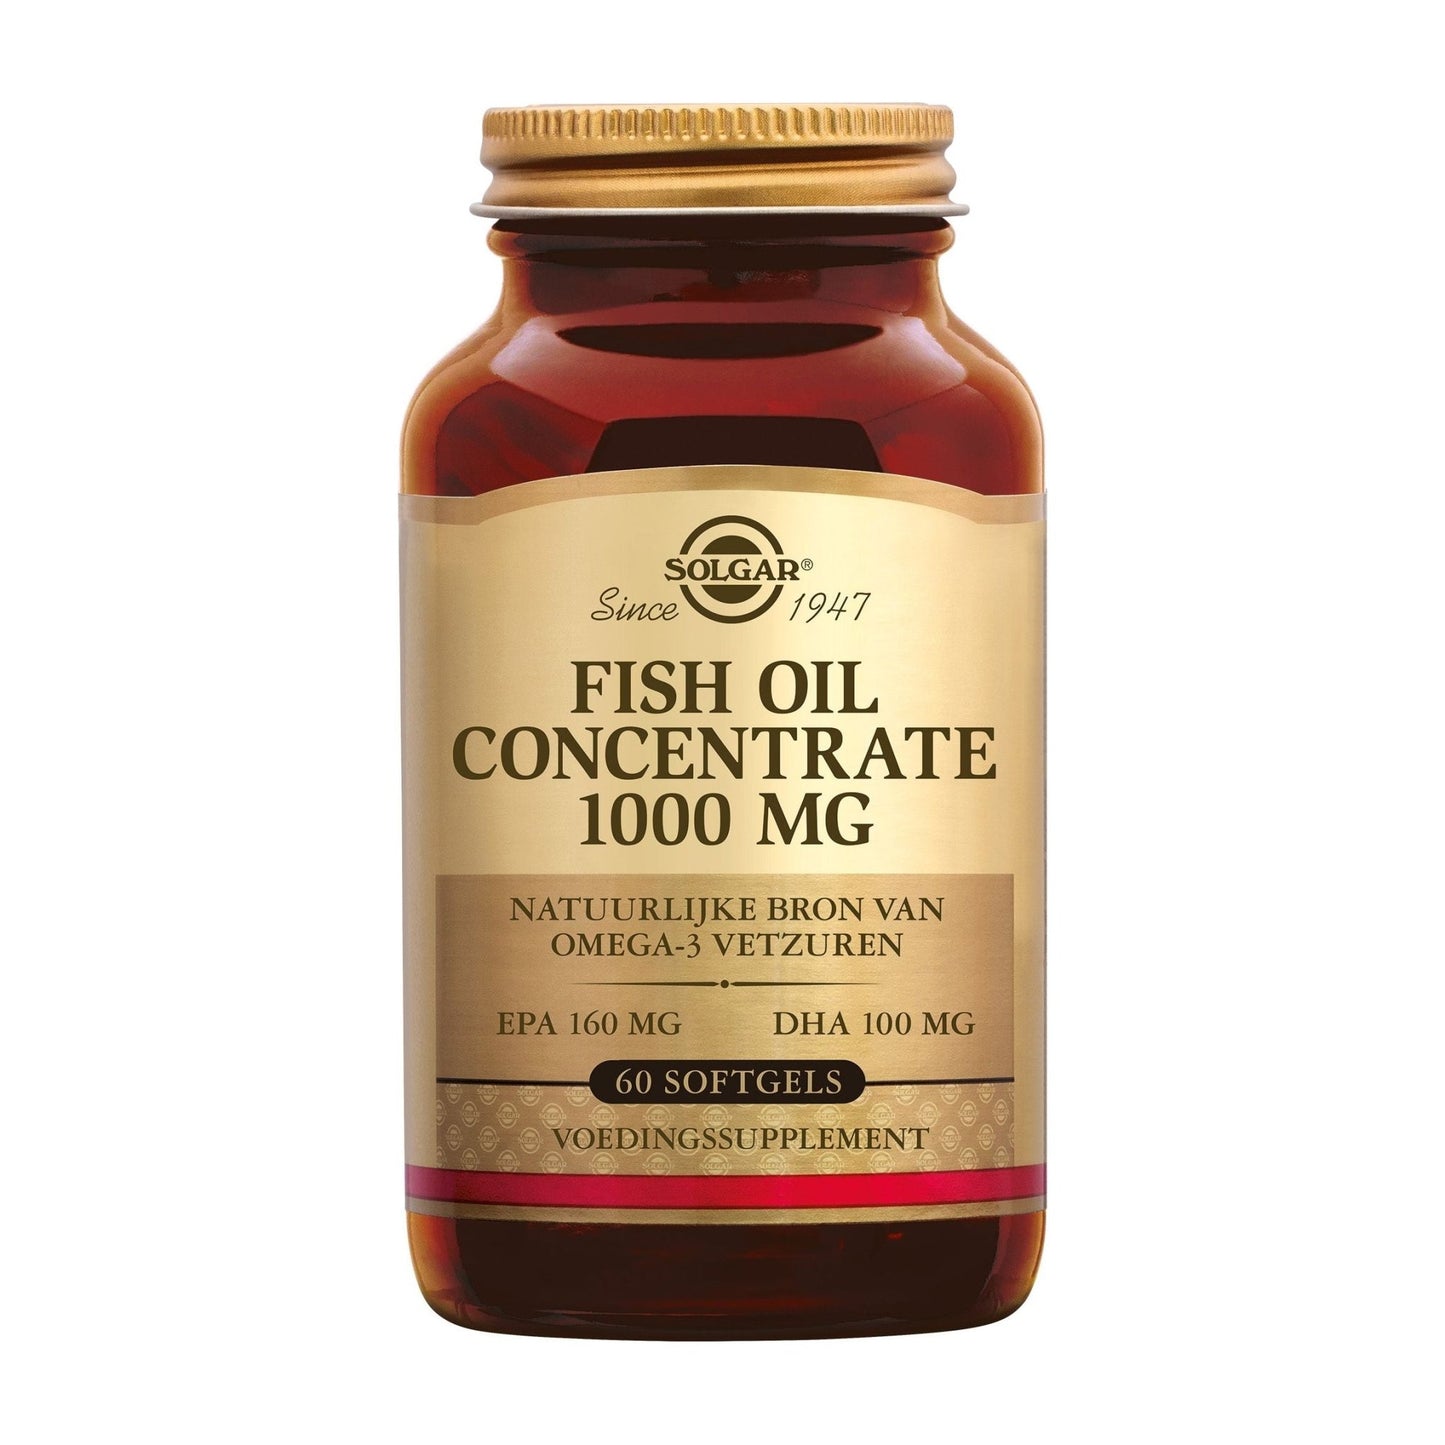 Fish Oil (Visolie) Concentrate 1000 mg Supplement Solgar   